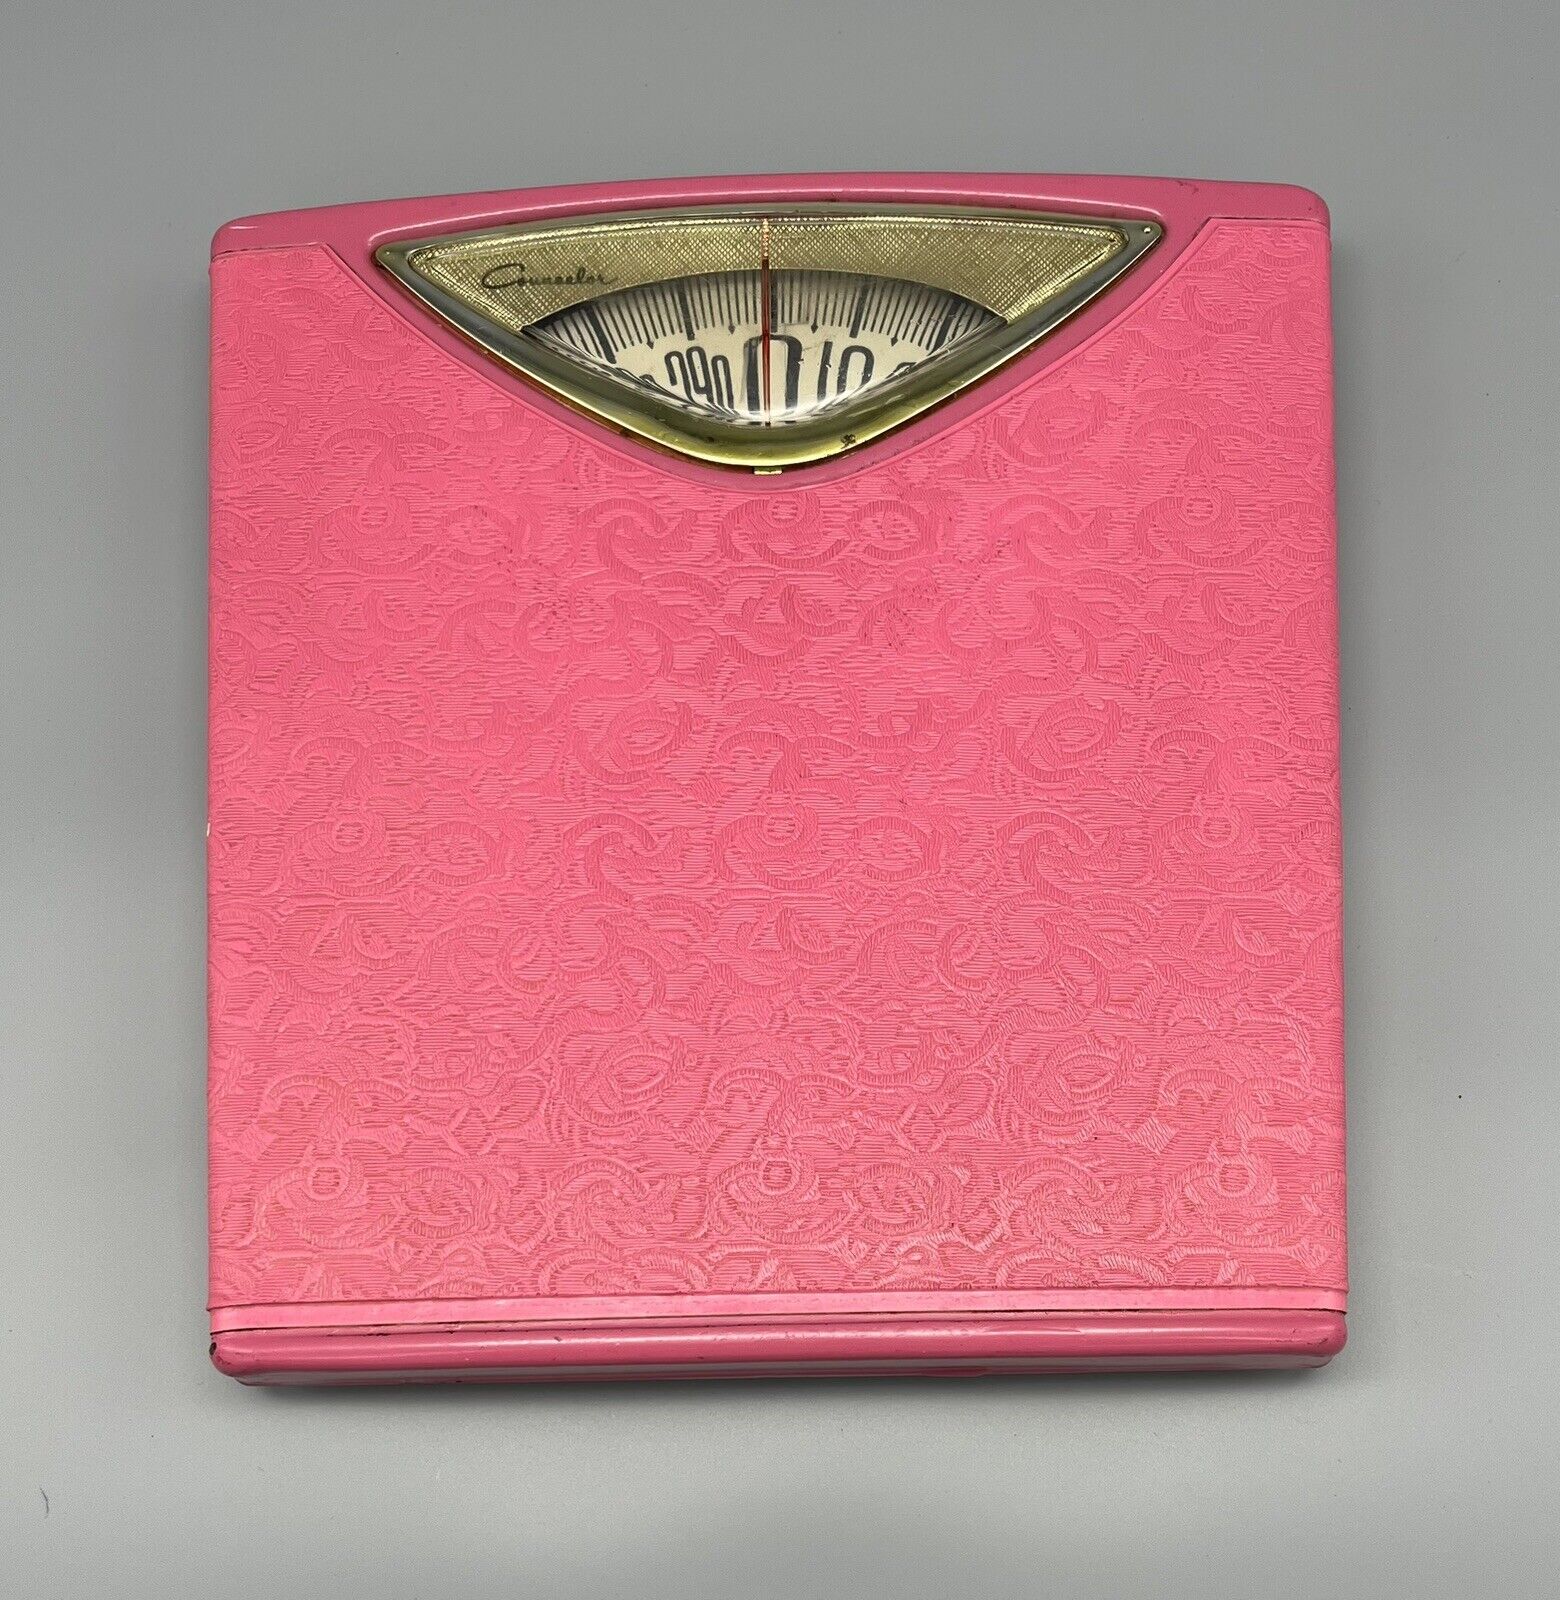 Vintage MCM Hot Pink and Gold Counselor Bathroom Scale The Brearley Company